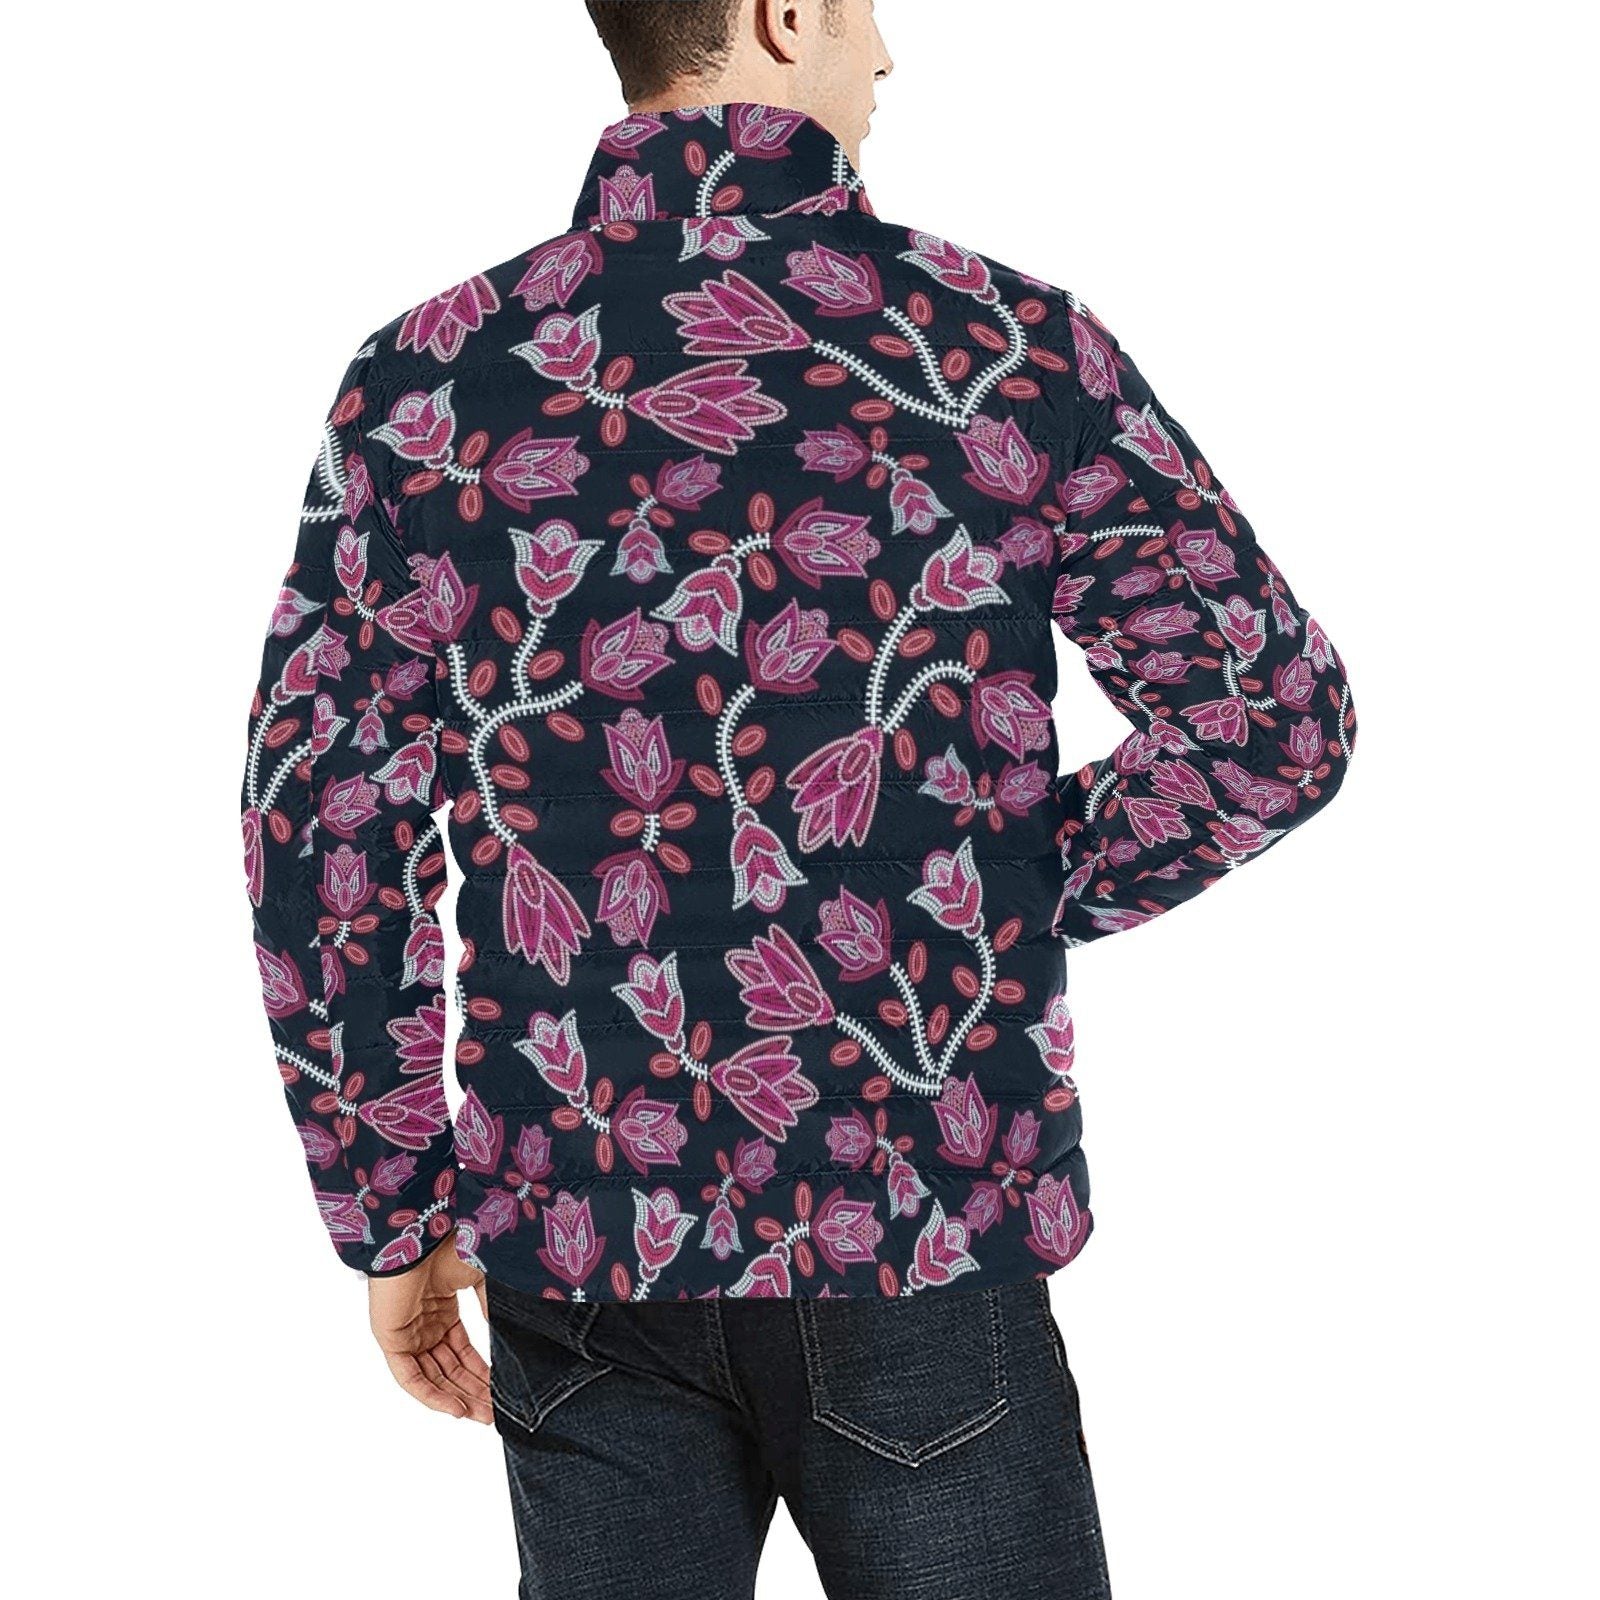 Beaded Pink Men's Stand Collar Padded Jacket (Model H41) Men's Stand Collar Padded Jacket (H41) e-joyer 